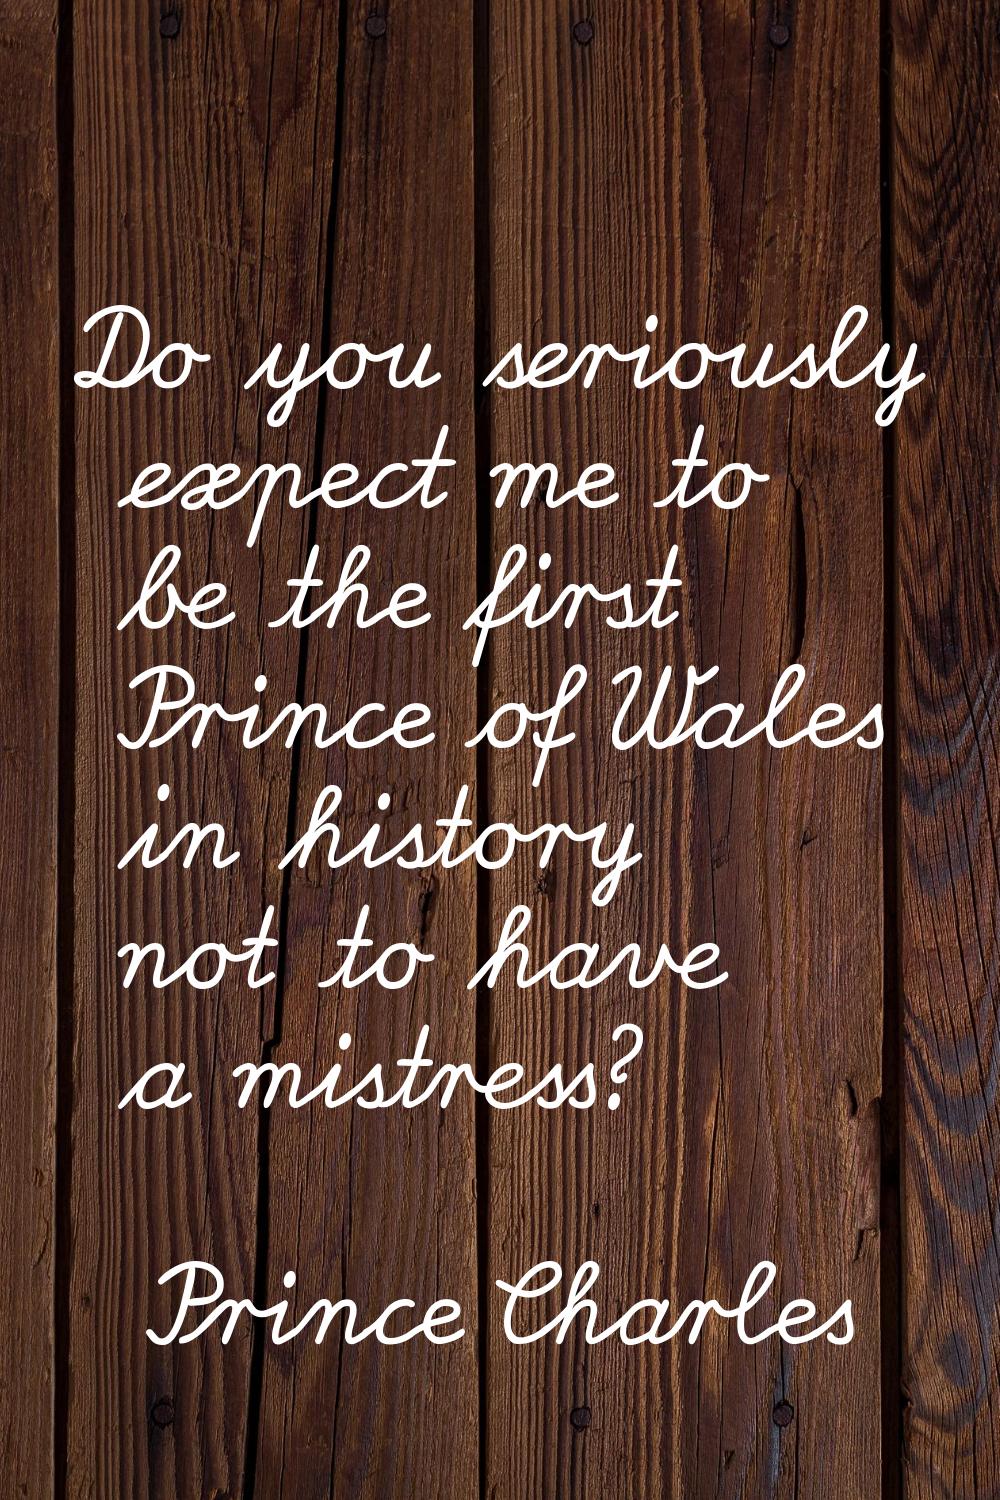 Do you seriously expect me to be the first Prince of Wales in history not to have a mistress?